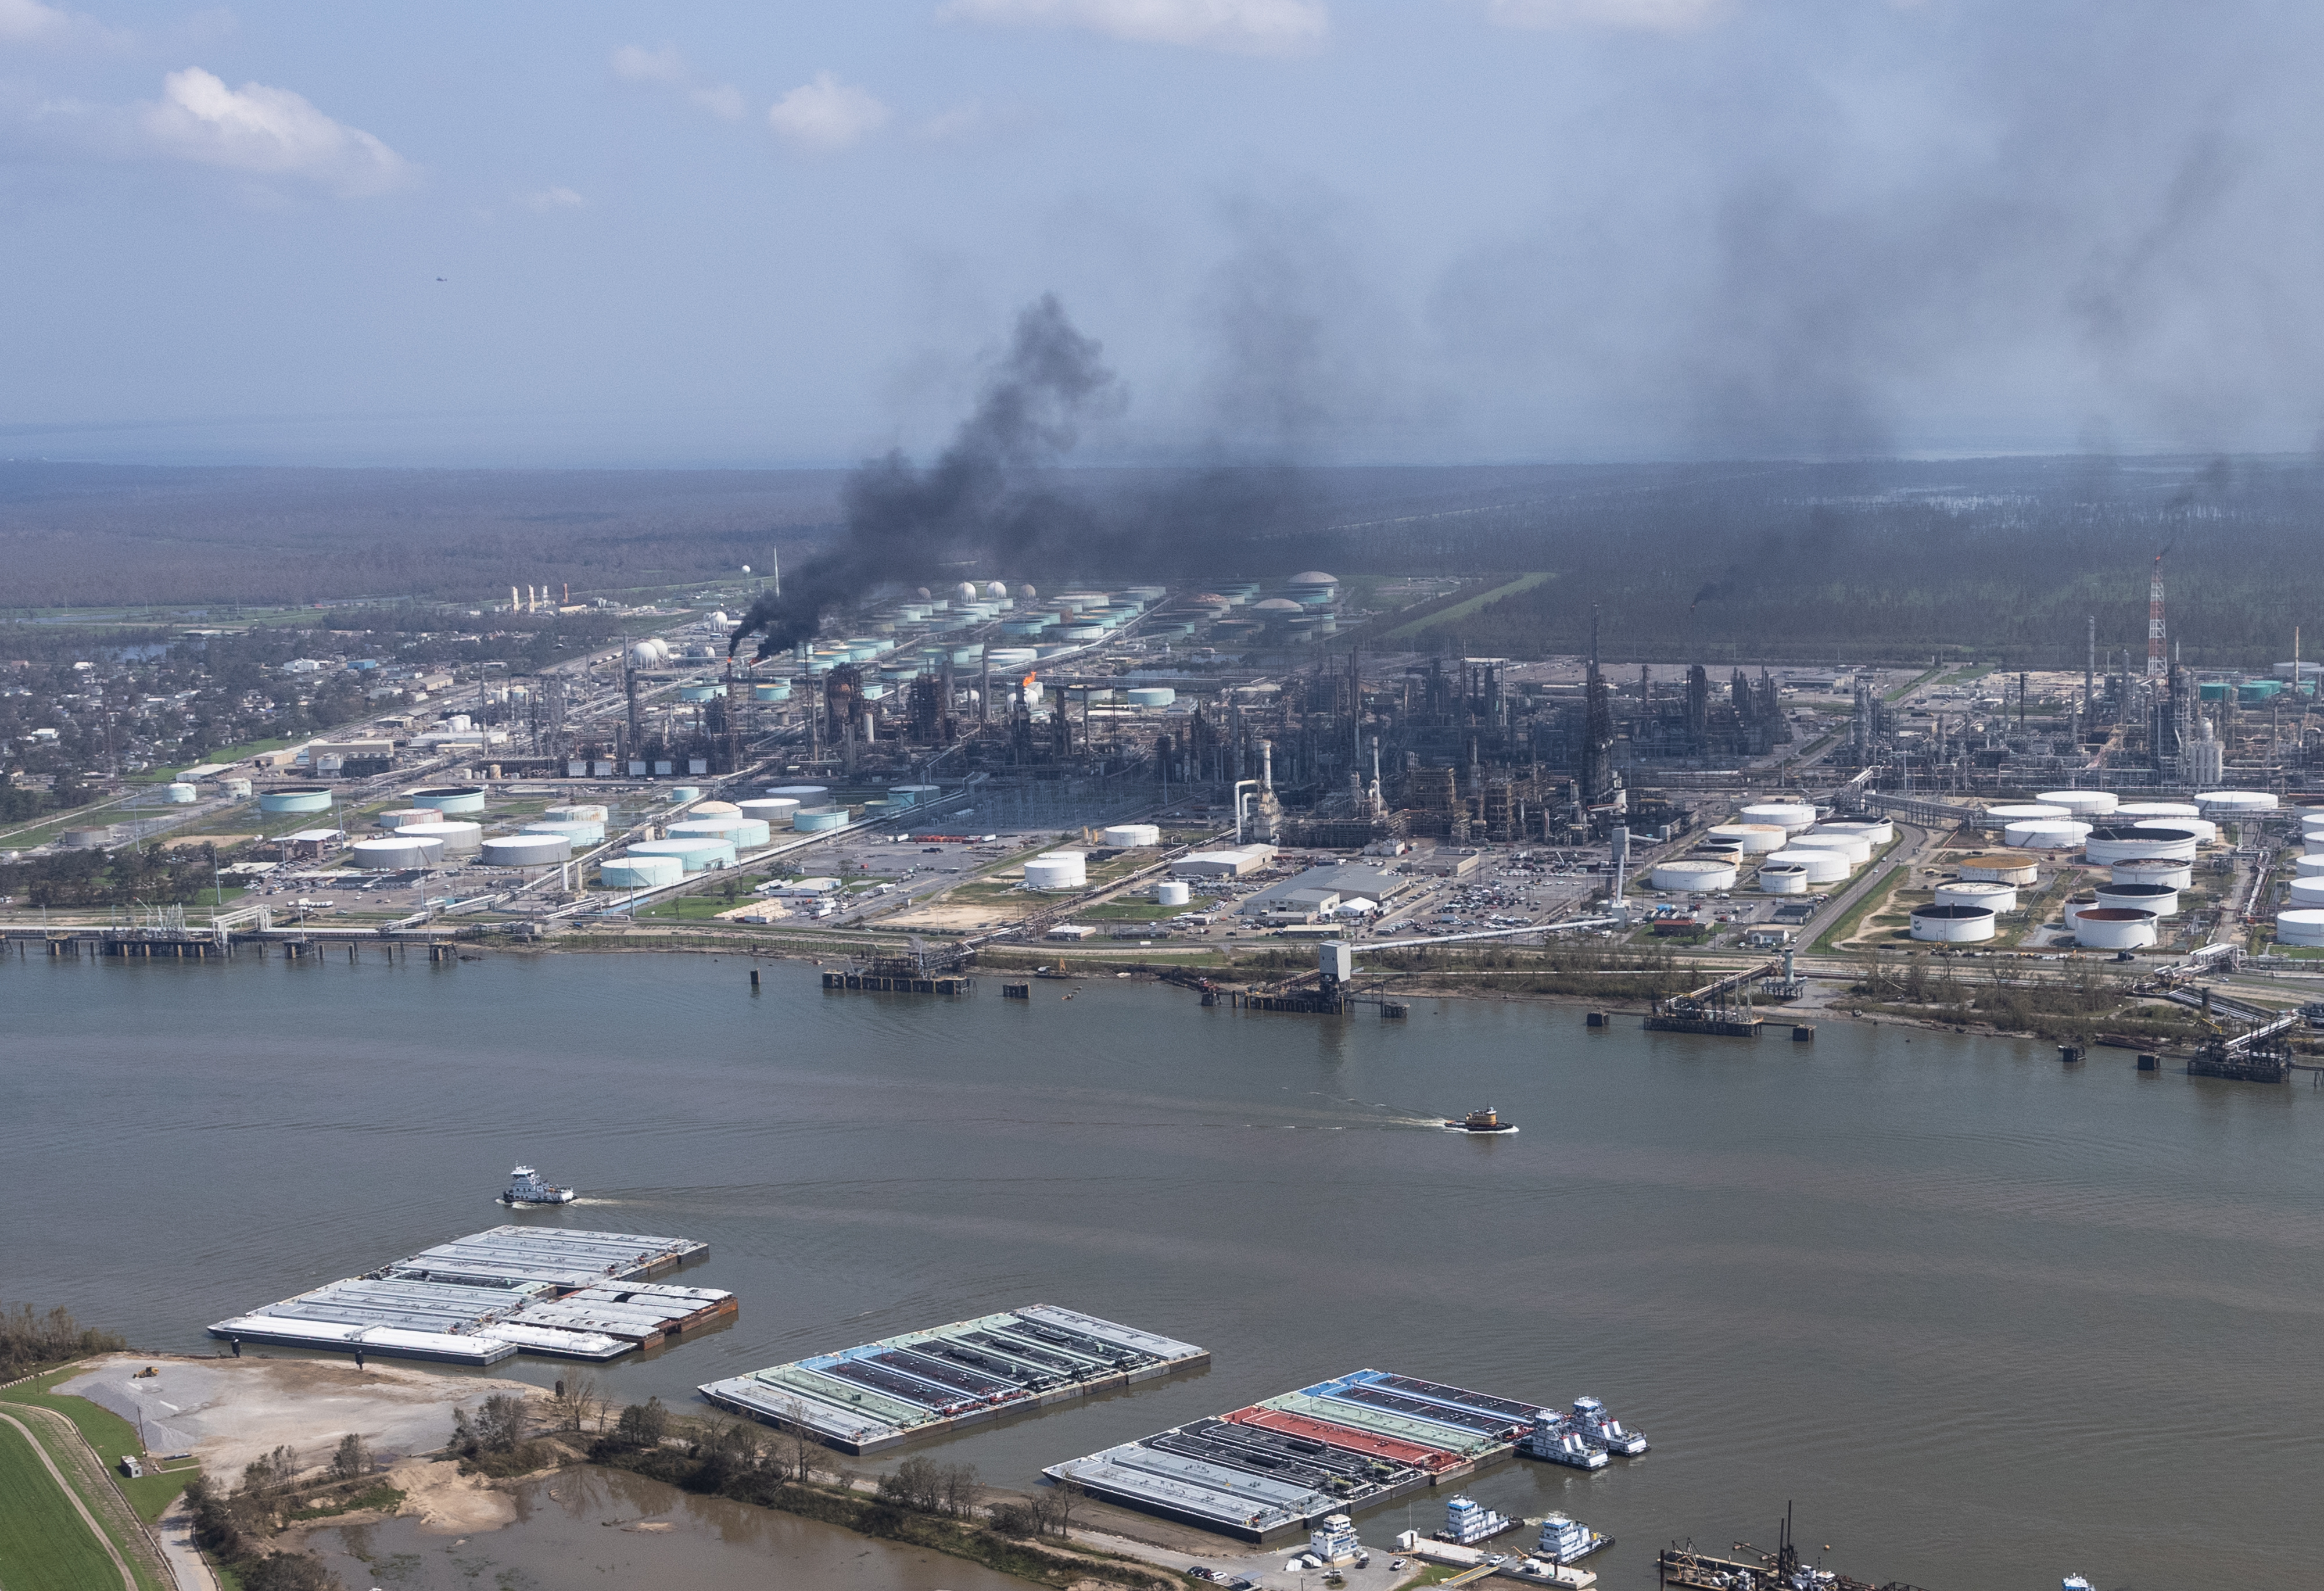 Shell's Norco Refinery, Hurricane Ida Aftermath, 'Cancer Alley' - Photographer Julie Dermansky 2